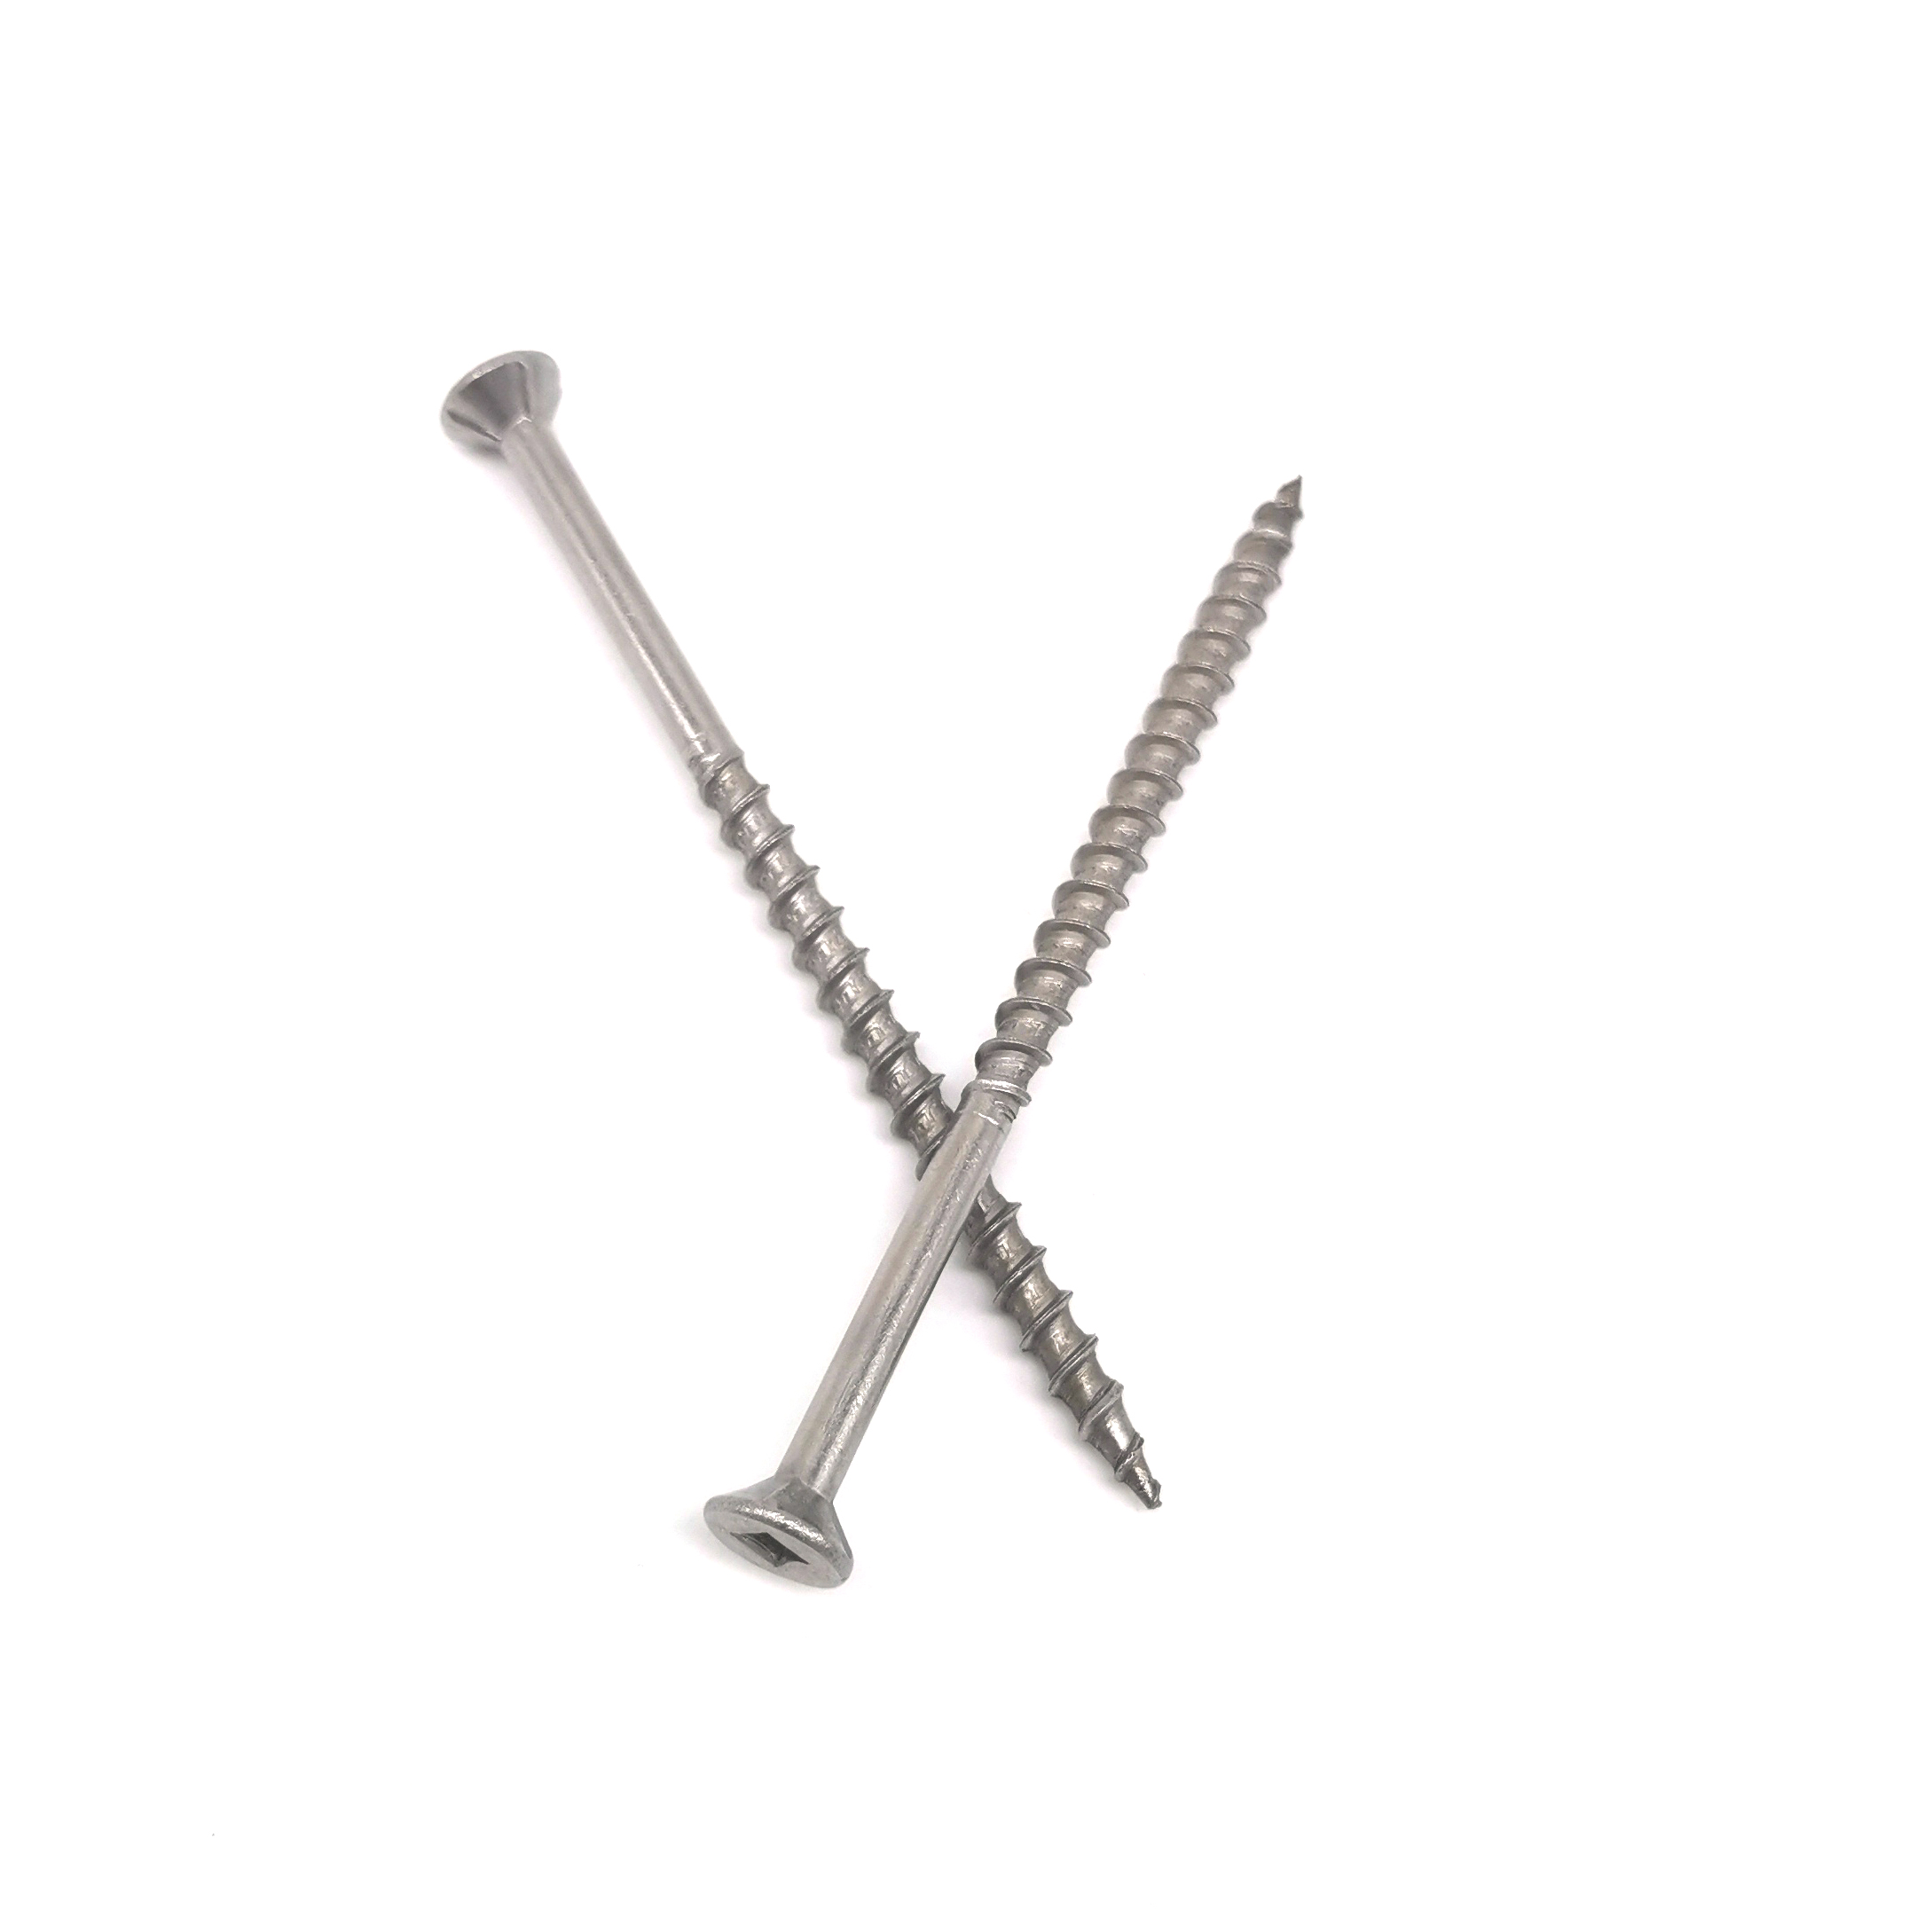 Steel High Quality Small Size Stainless Steel Drywall/Wood/Self Tapping Screw